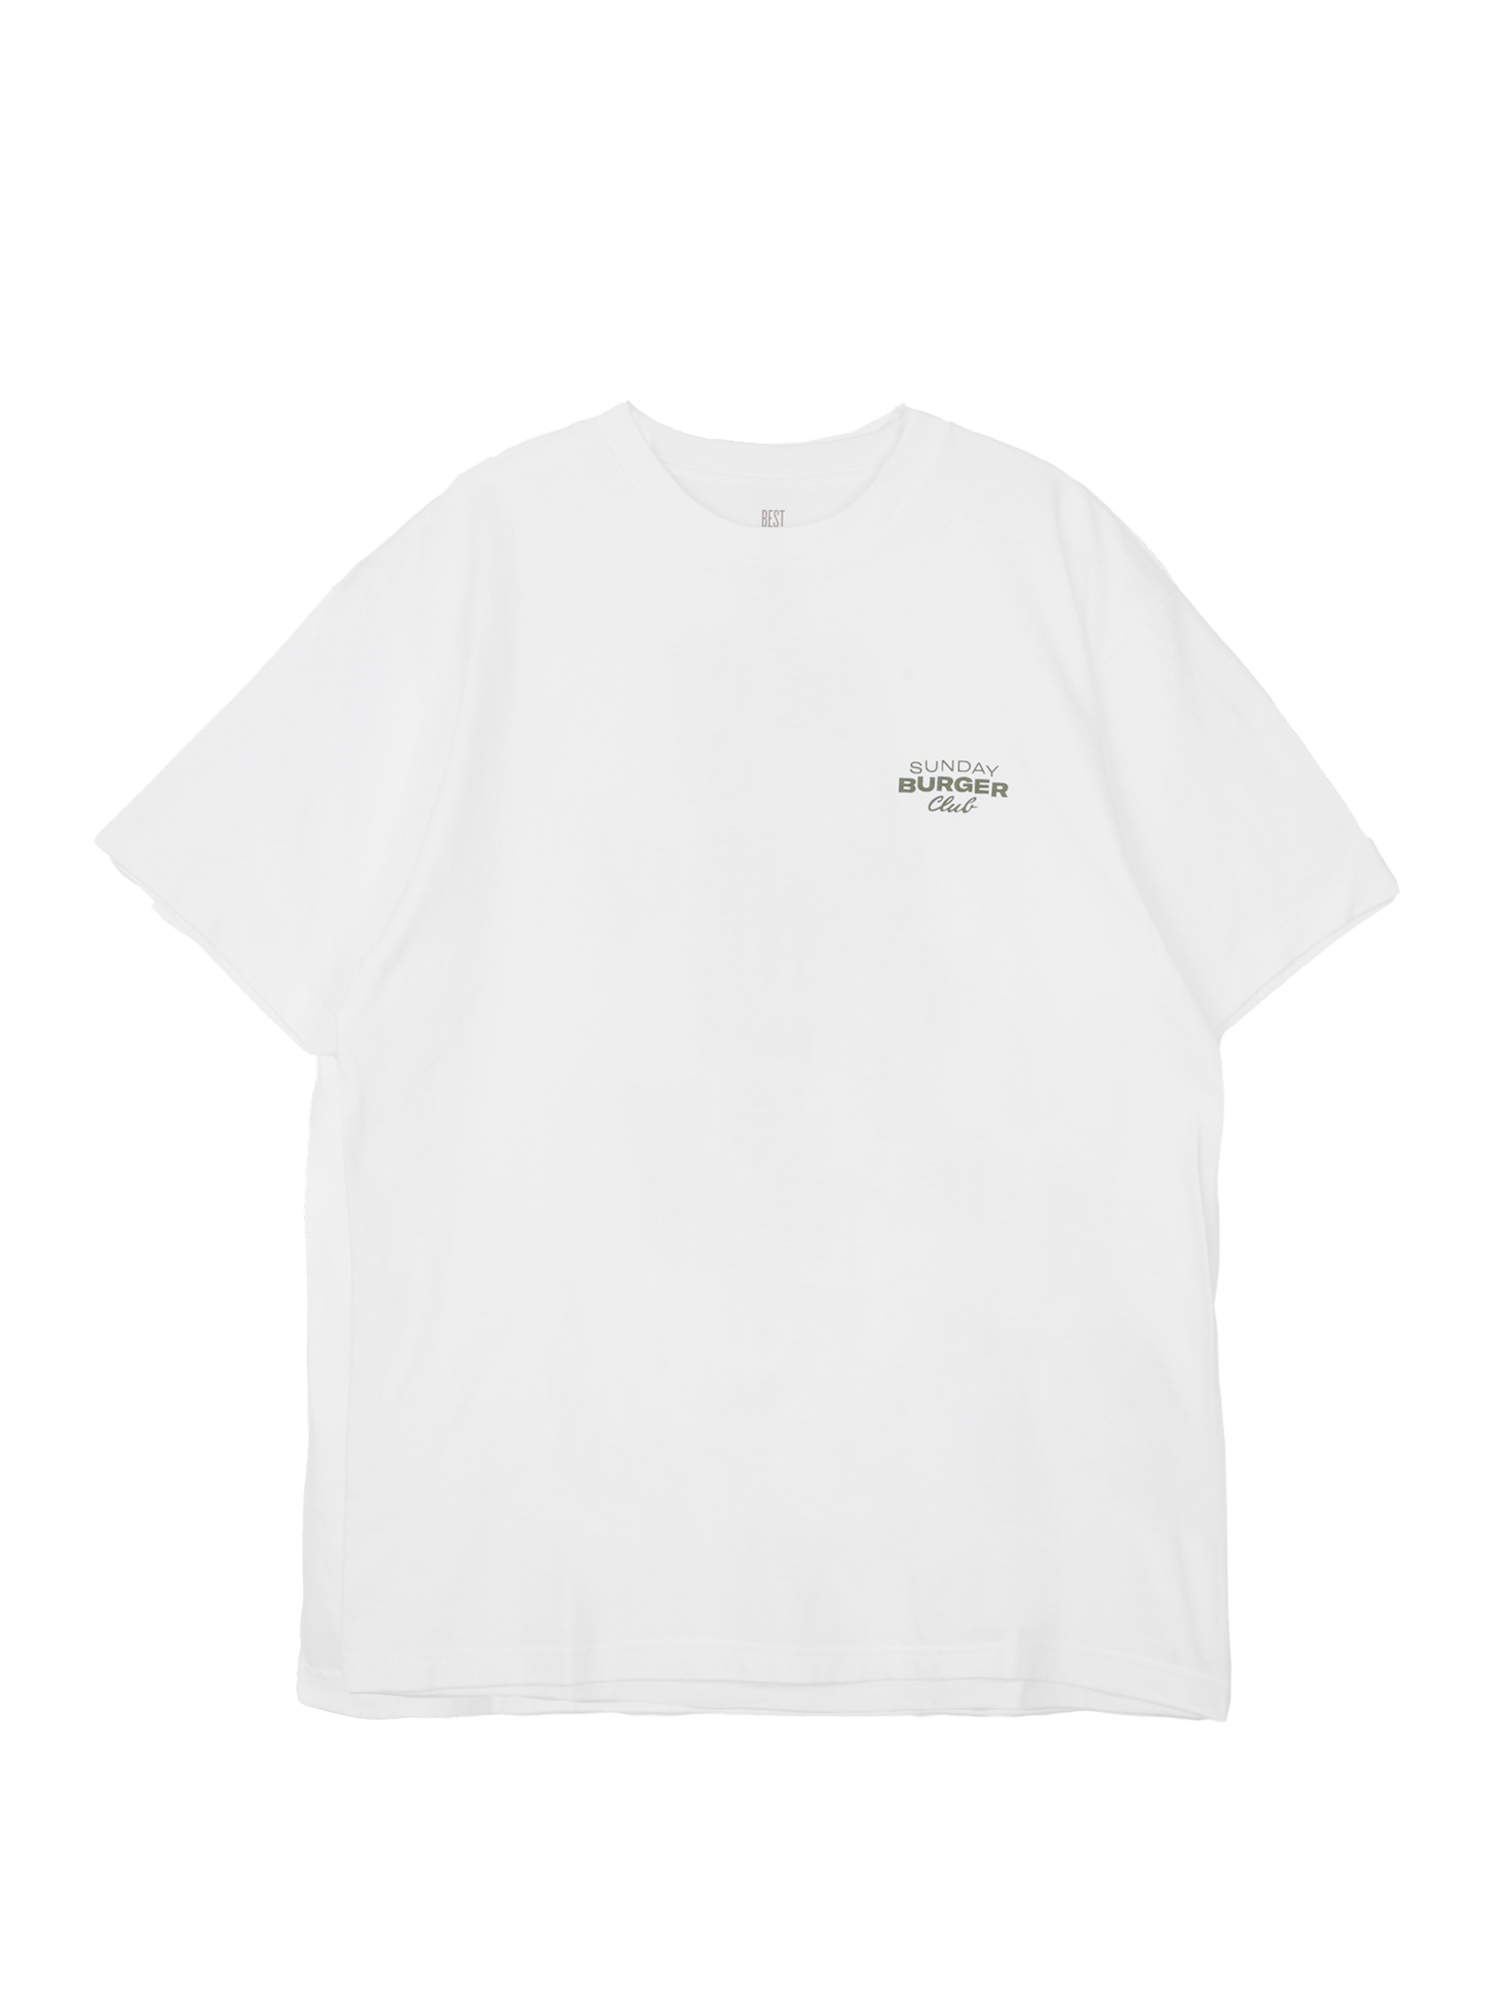 BSE White T-Shirts - Short Sleeve